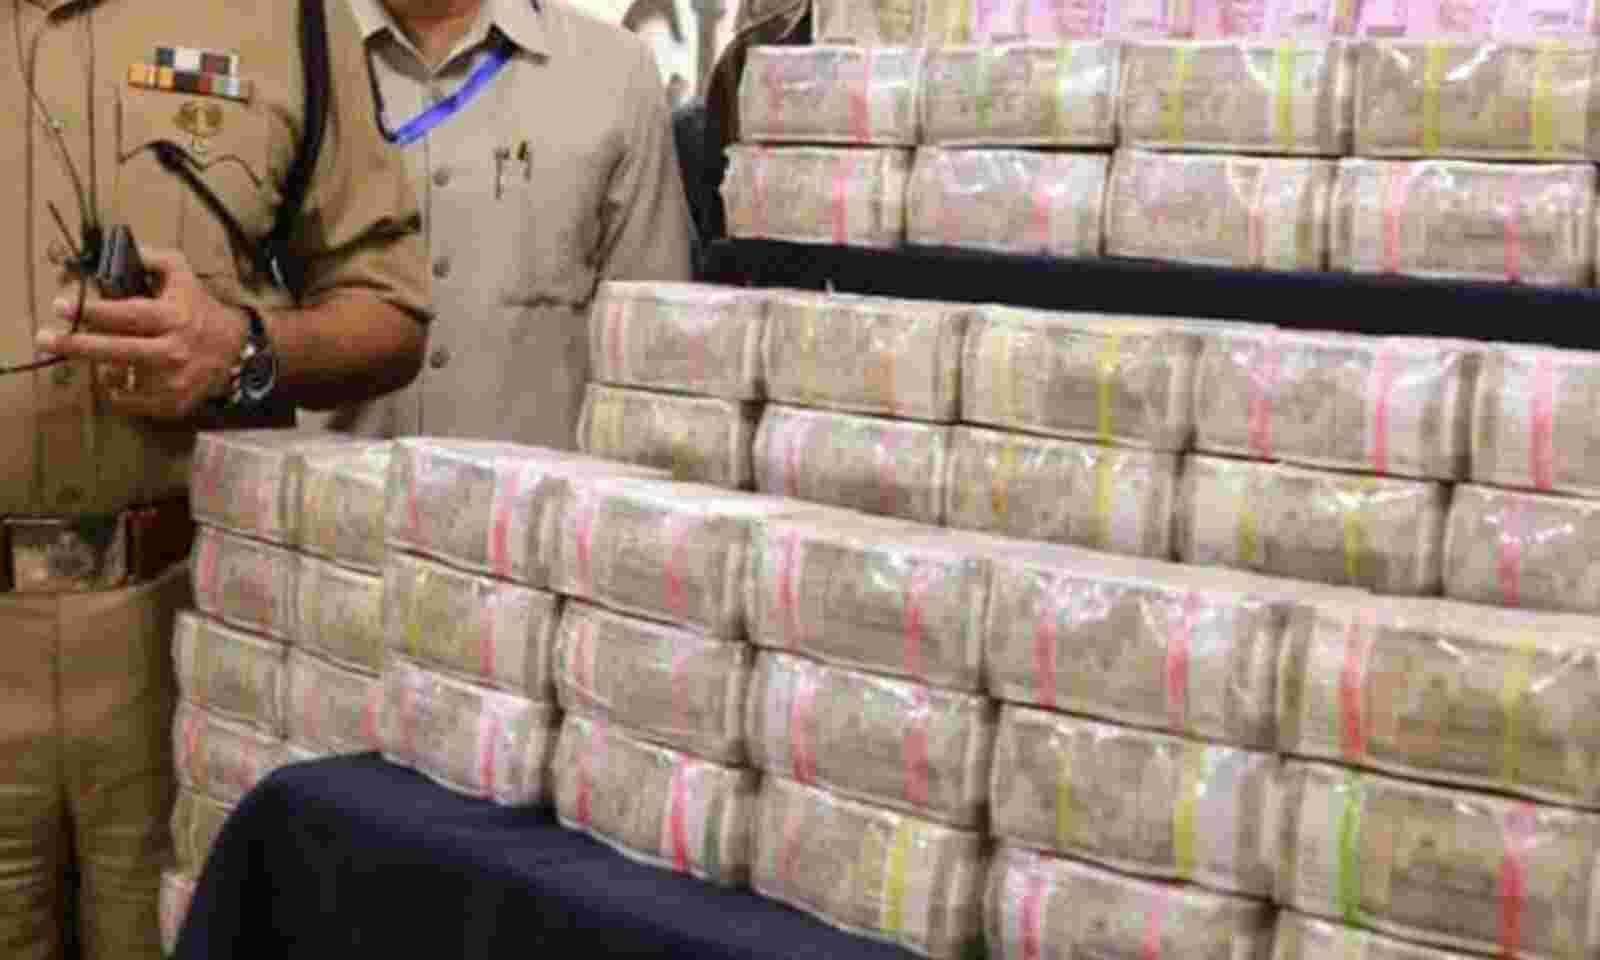 Hawala racket busted in Hyderabad, Rs 40 lakh cash recovered